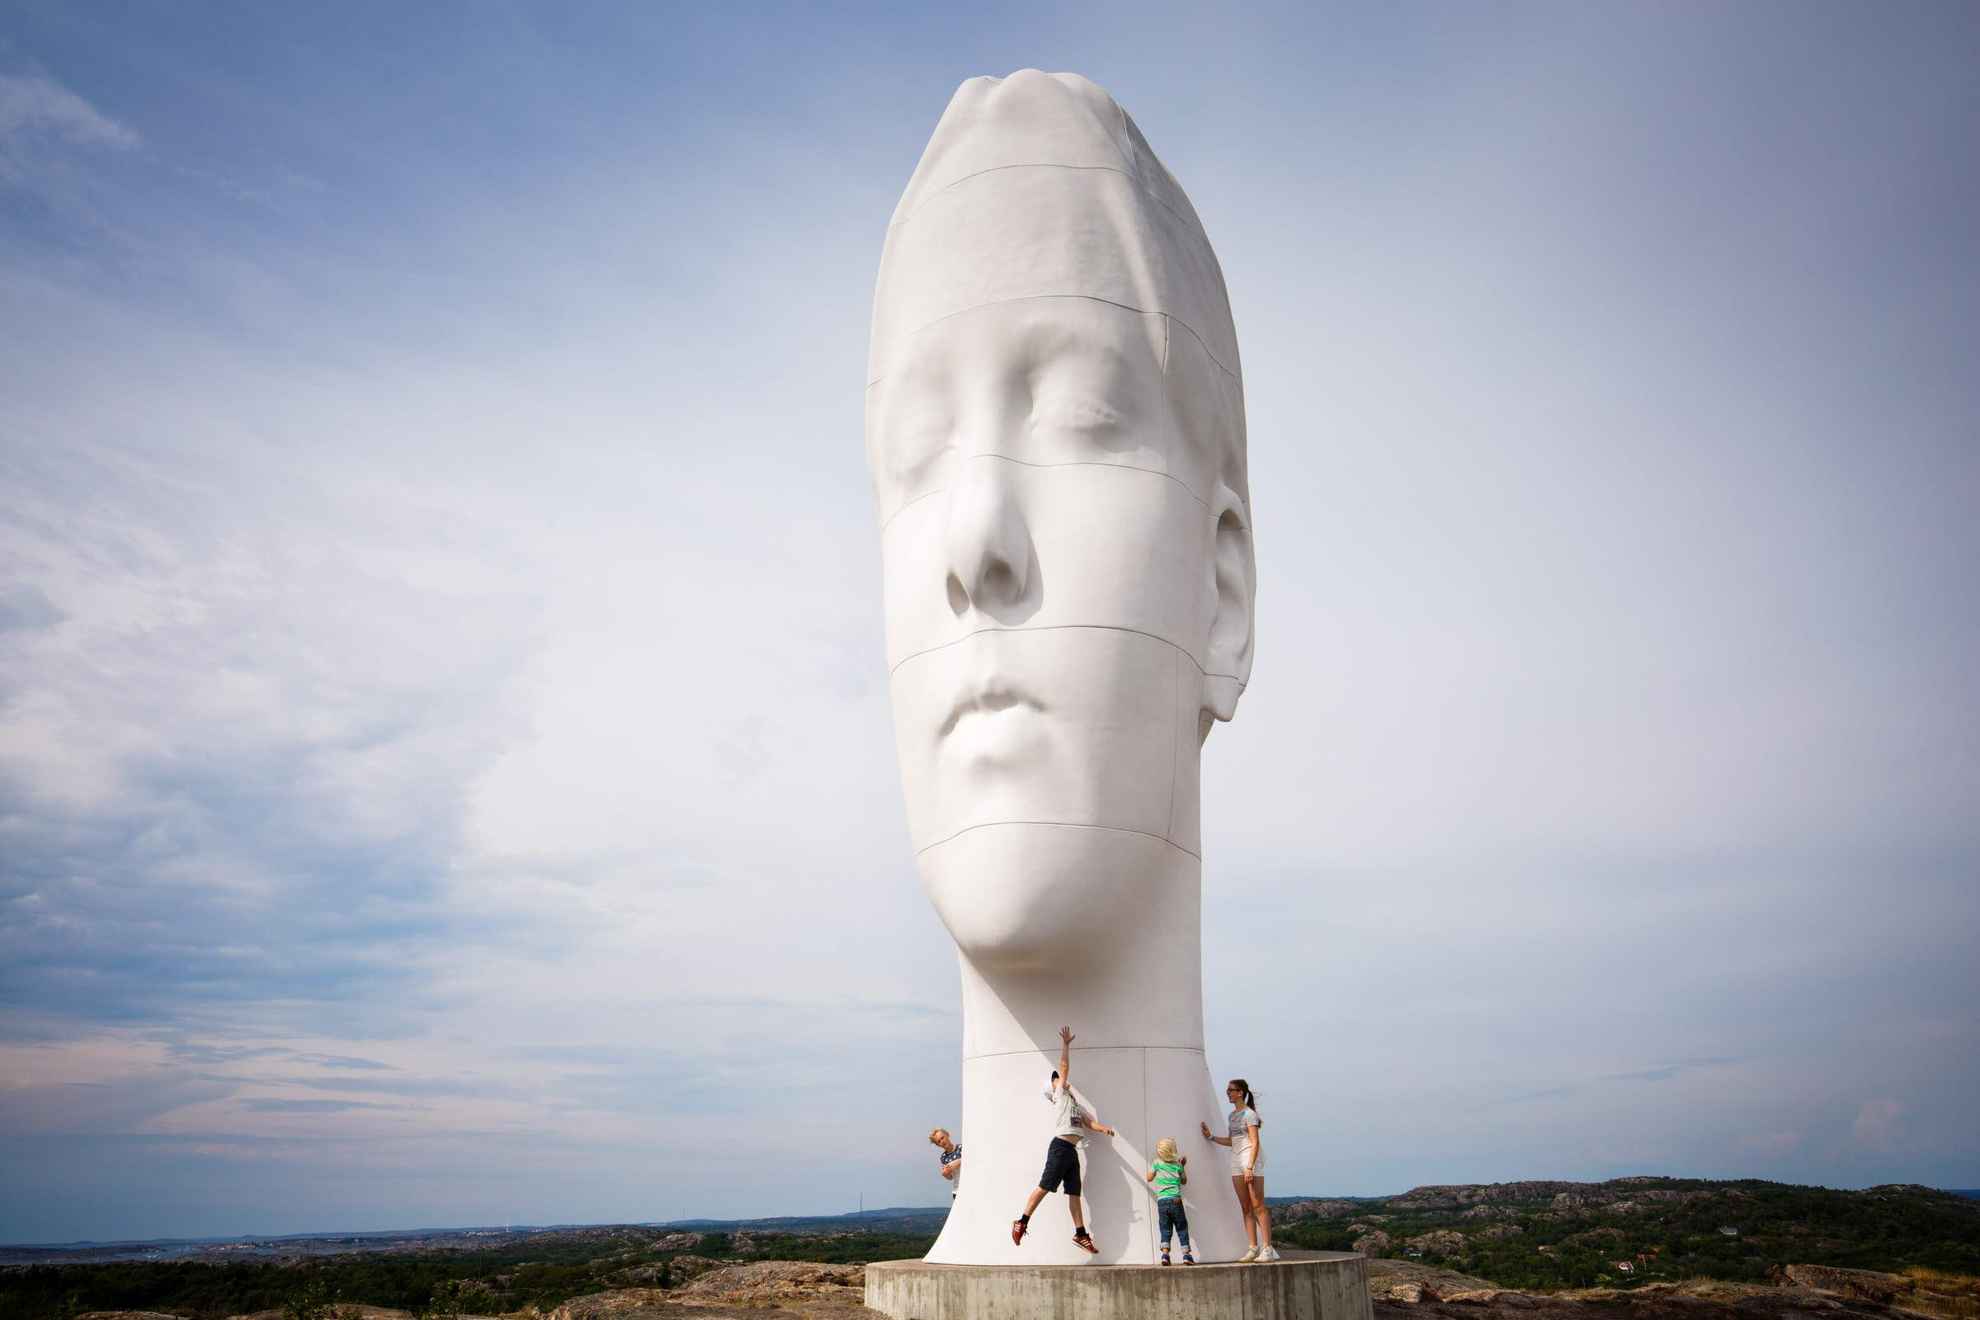 A large statue in the shape of a human head standing in the middle of nature, with four people standing standing right by it.